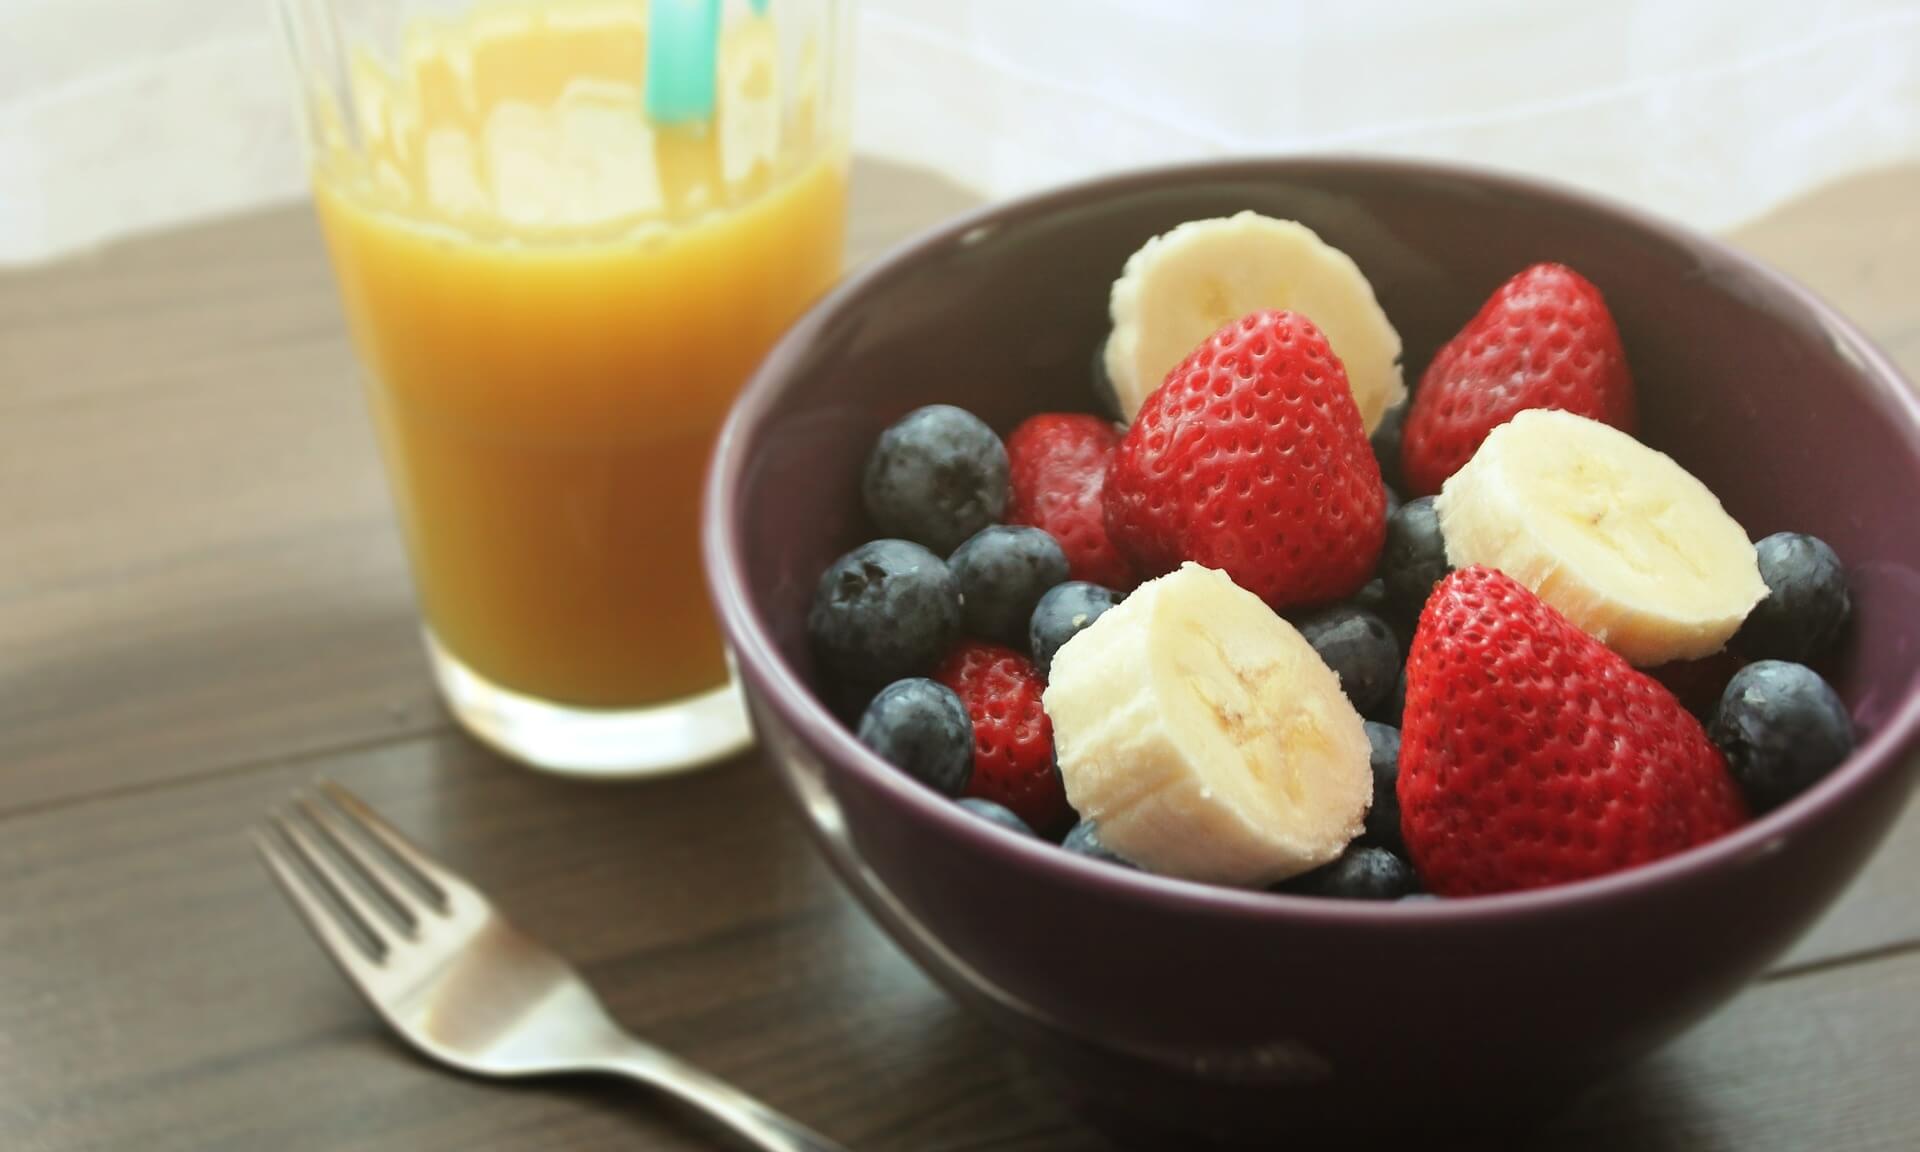 fruits-in-a-bowl-with-a-fork-and-a-glass-of-orange-juice-on-the-side